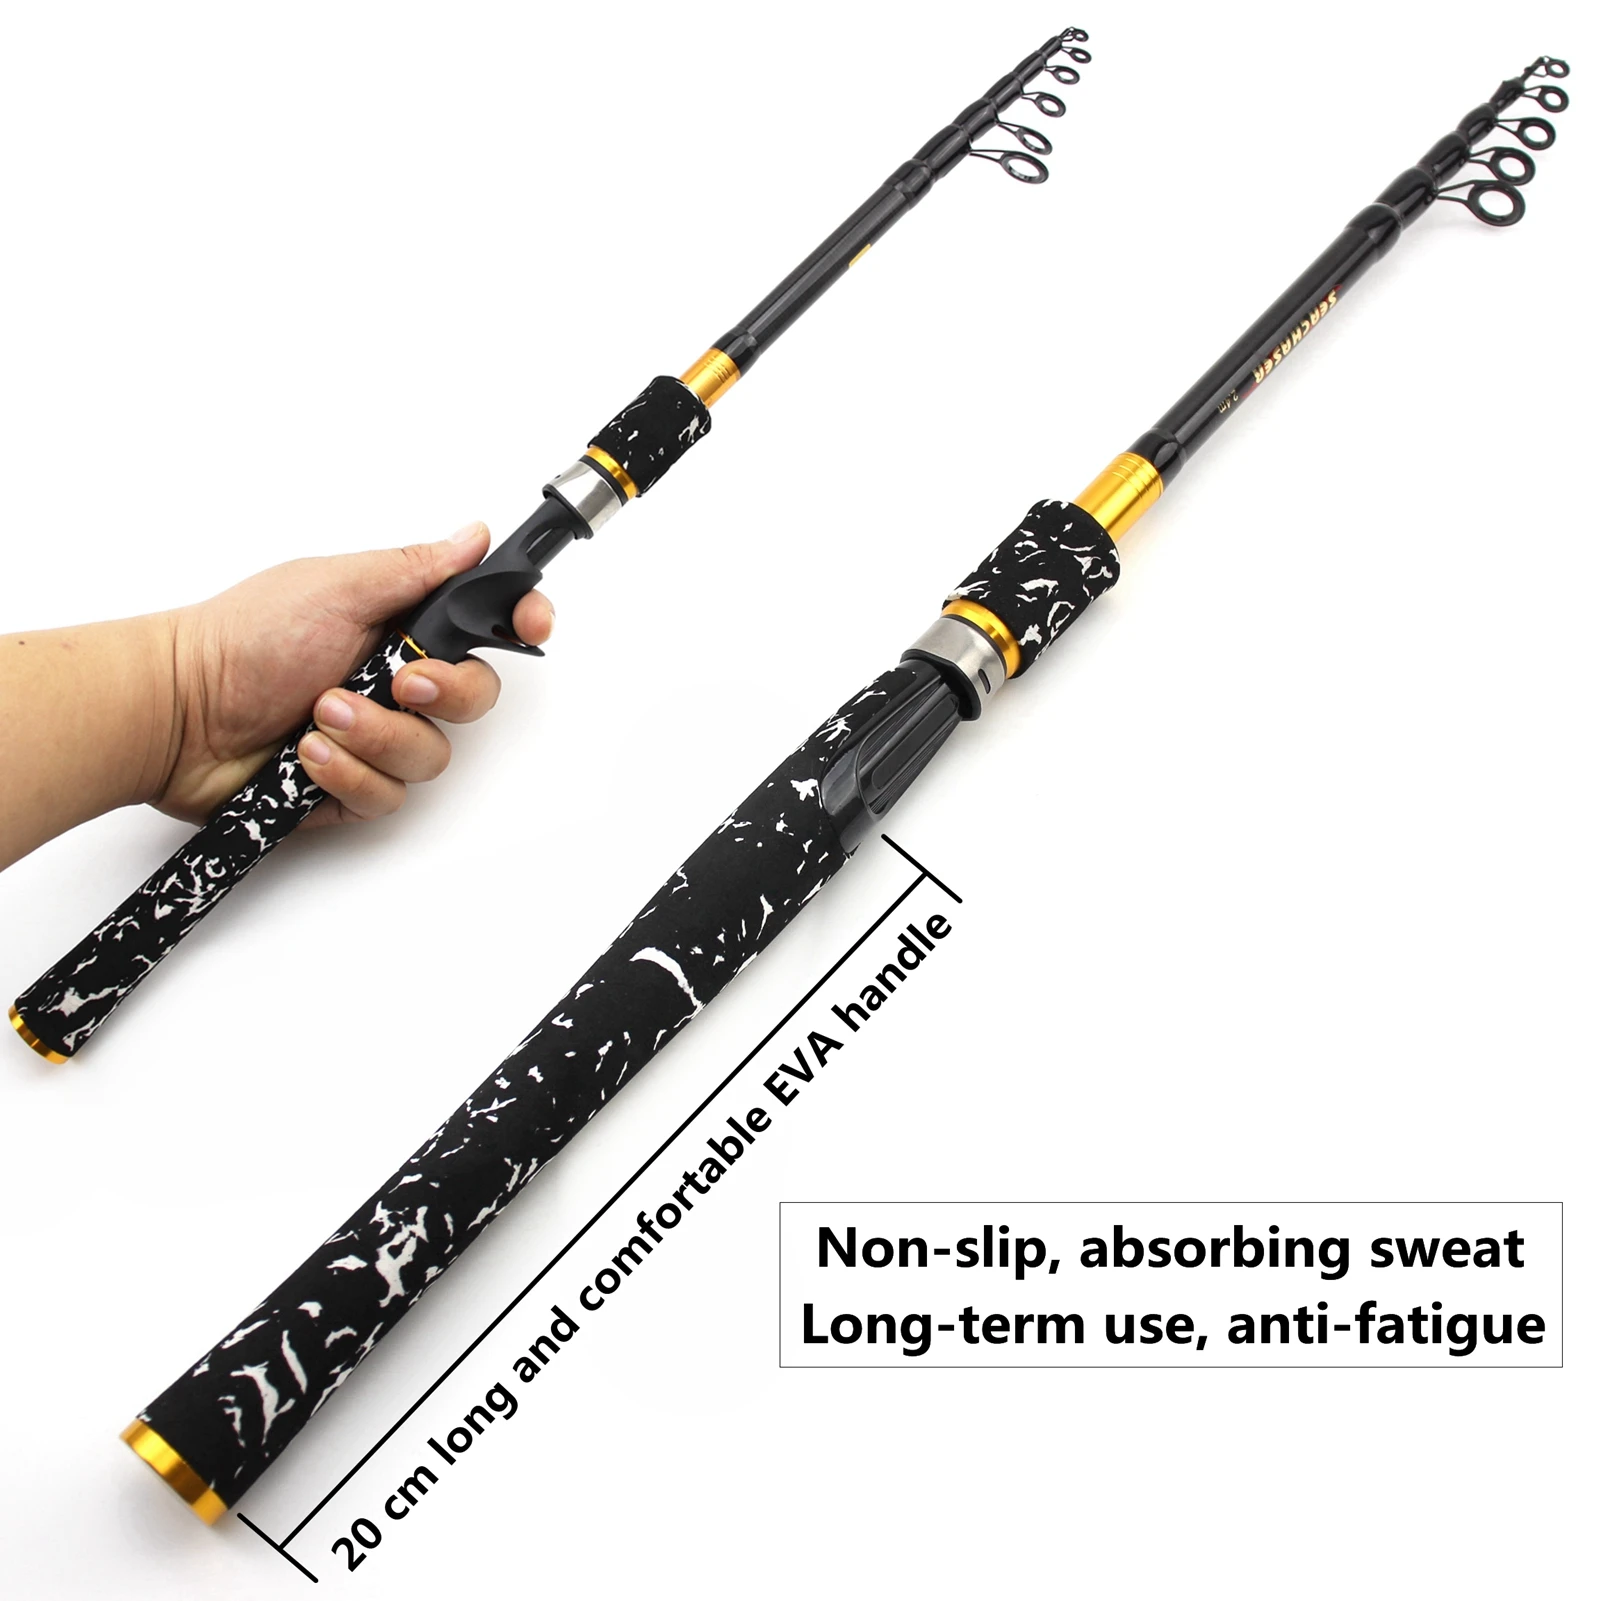 NEW 1.8m-2.7m carbon rod M power Spinning Casting Rod Portable Telescopic Fishing  Rod Pole Extended EVA handle Lure Weight 5-28g